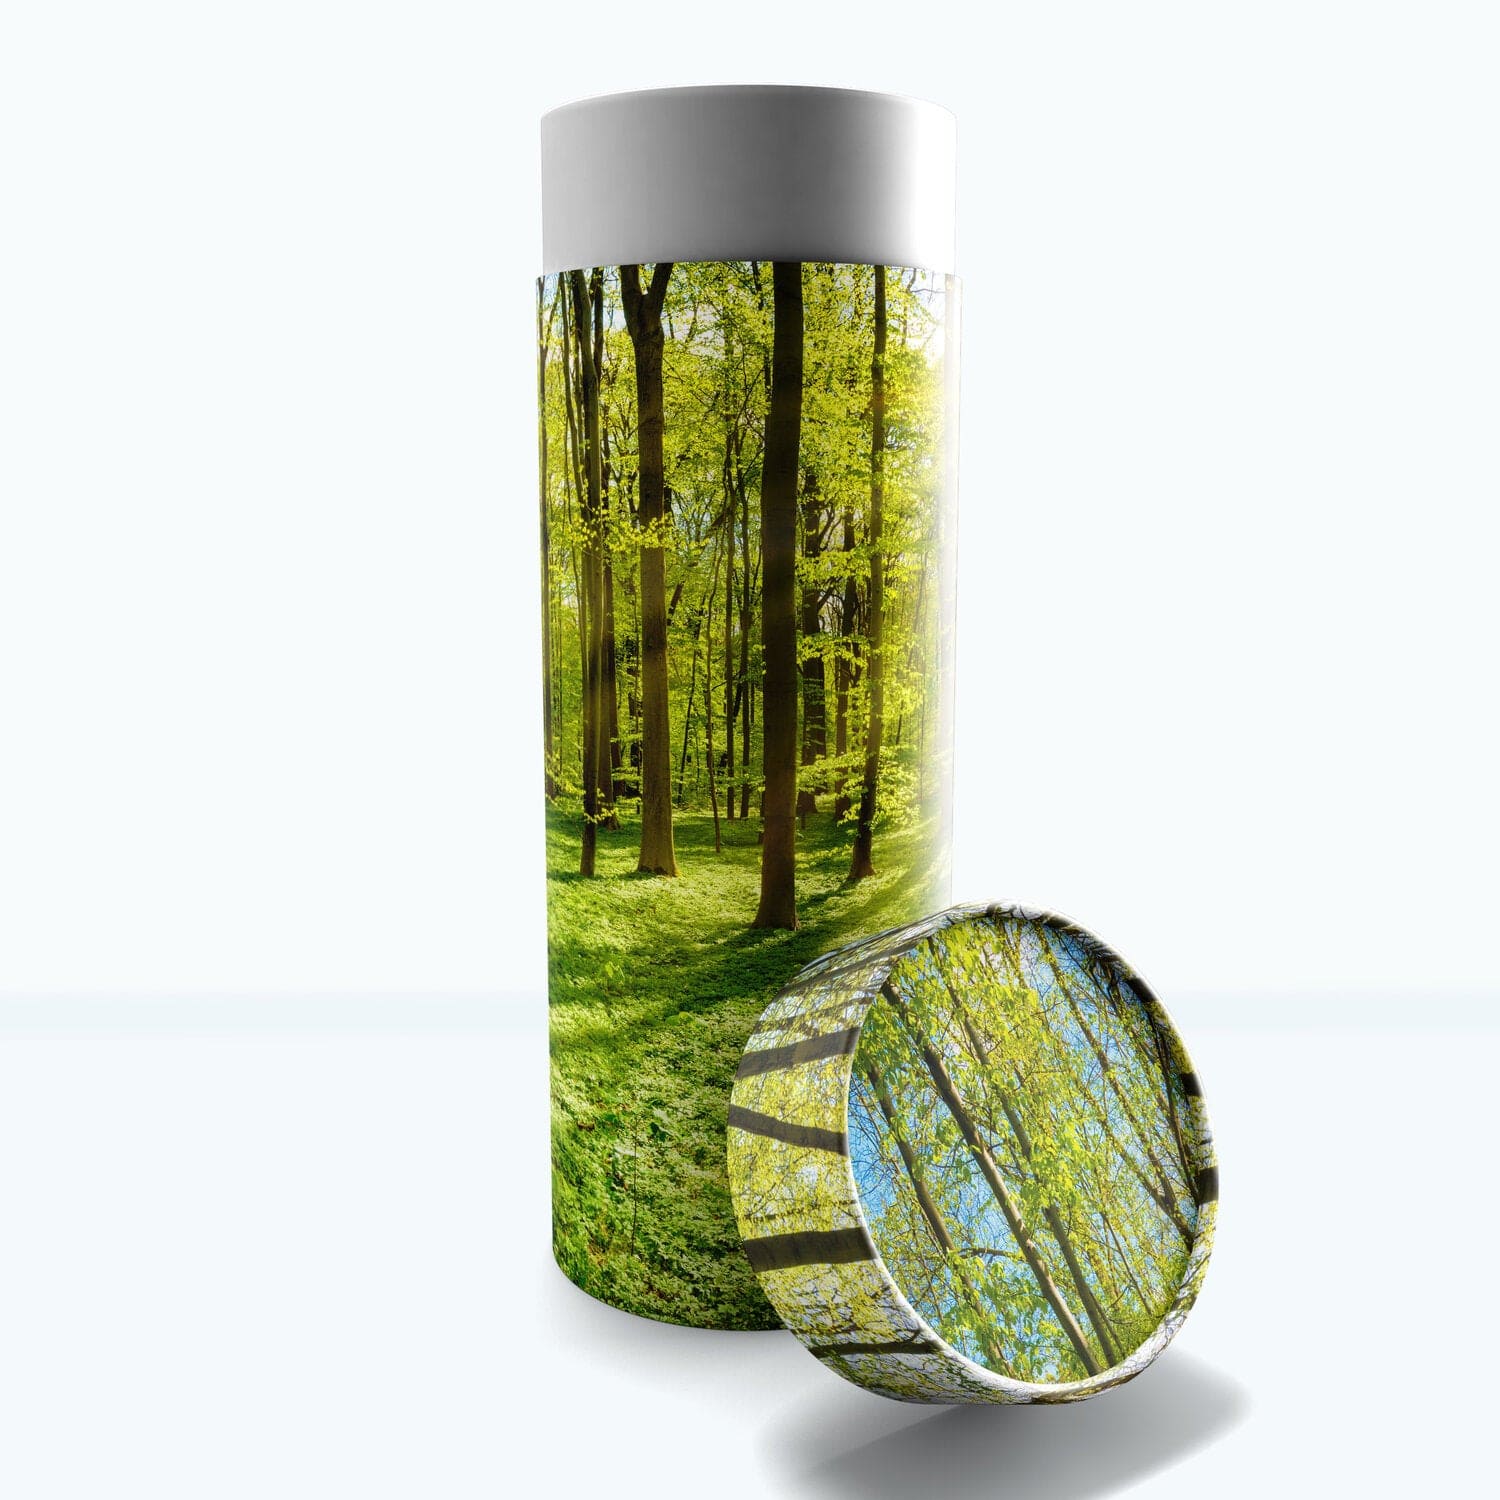 Commemorative Cremation Urns Medium Emerald Forest Biodegradable & Eco Friendly Burial or Scattering Urn / Tube